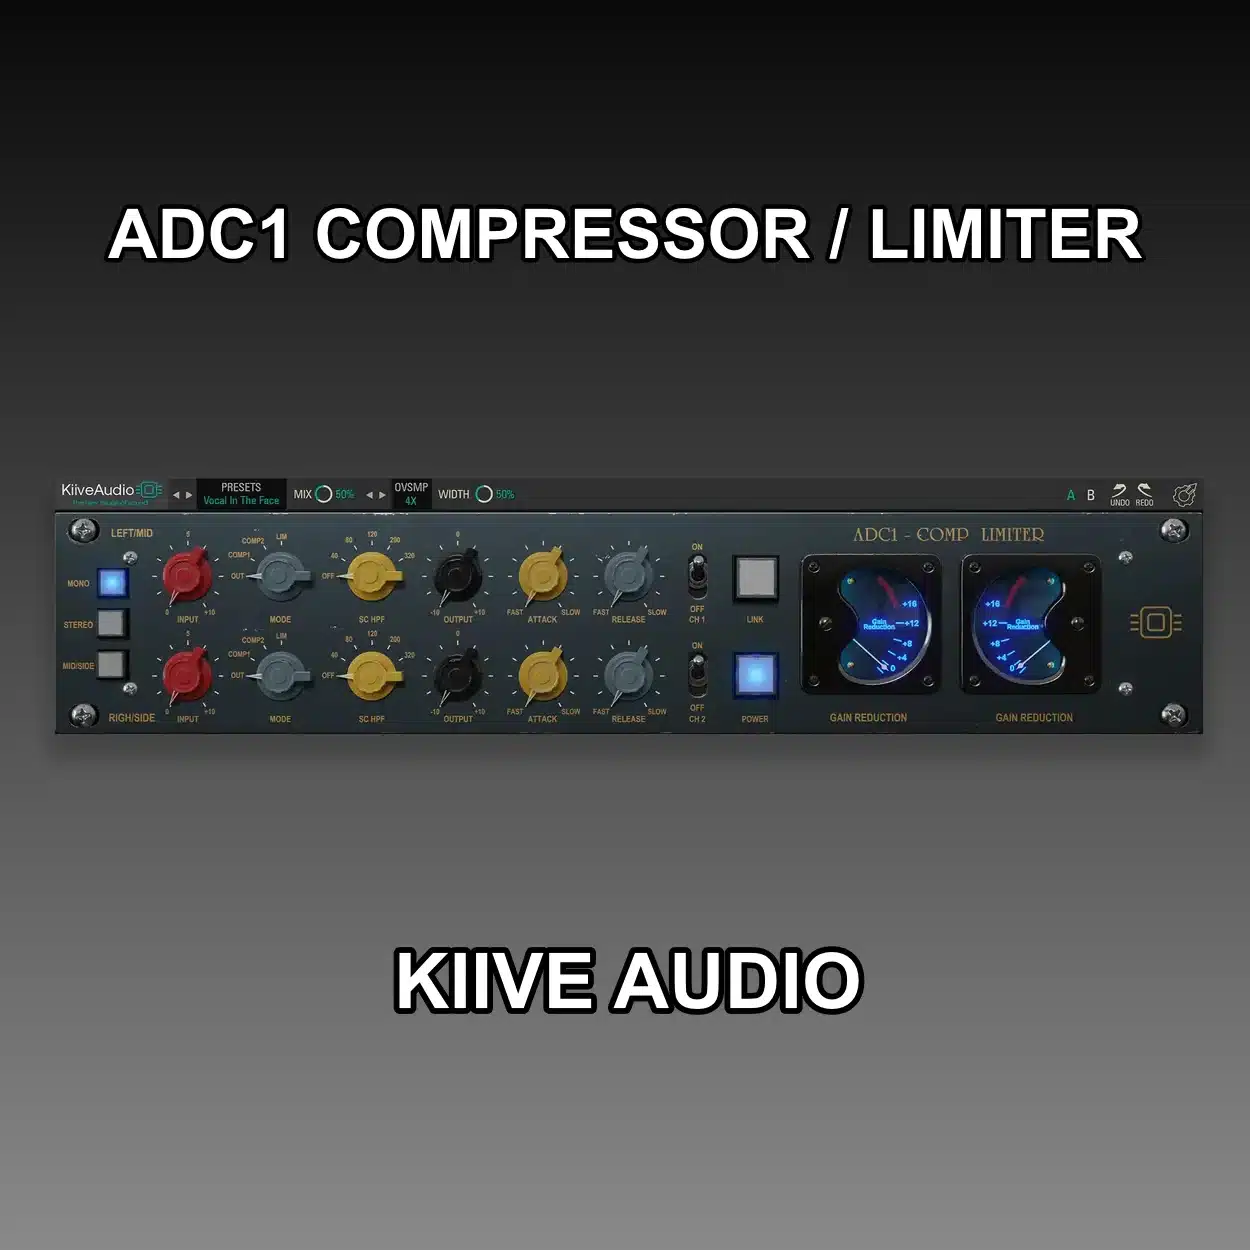 60% off “ADC1 Compressor / Limiter” by Kiive Audio